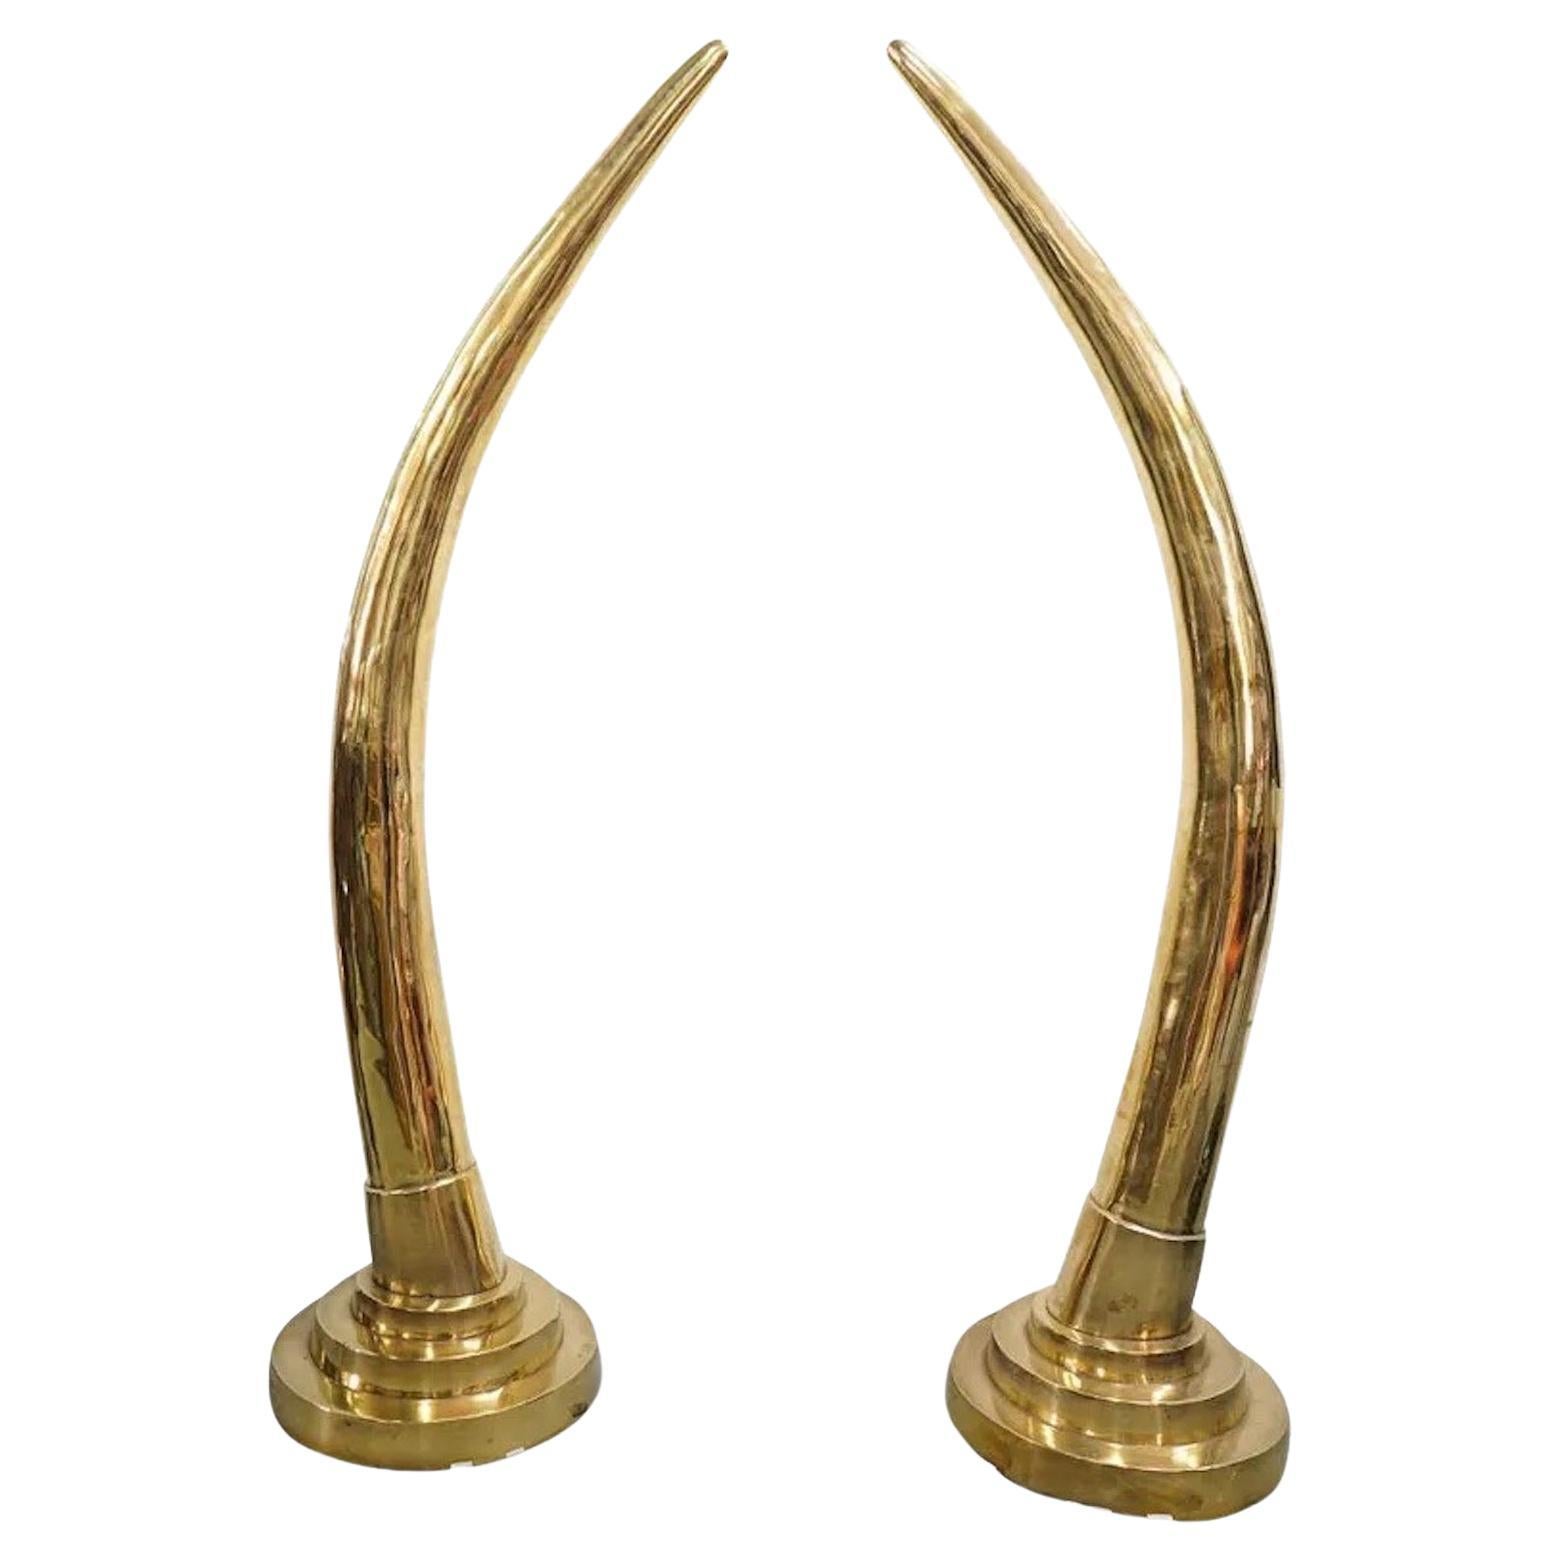 Amazing pair of life-sized polished cast solid brass faux elephant tusks mounted to tiered round brass stands, attributed to Suzanne Dahl and Jerry Barich from their Versailles Collection, Kilimanjaro Series, 1981.
Very rare to find in brass as